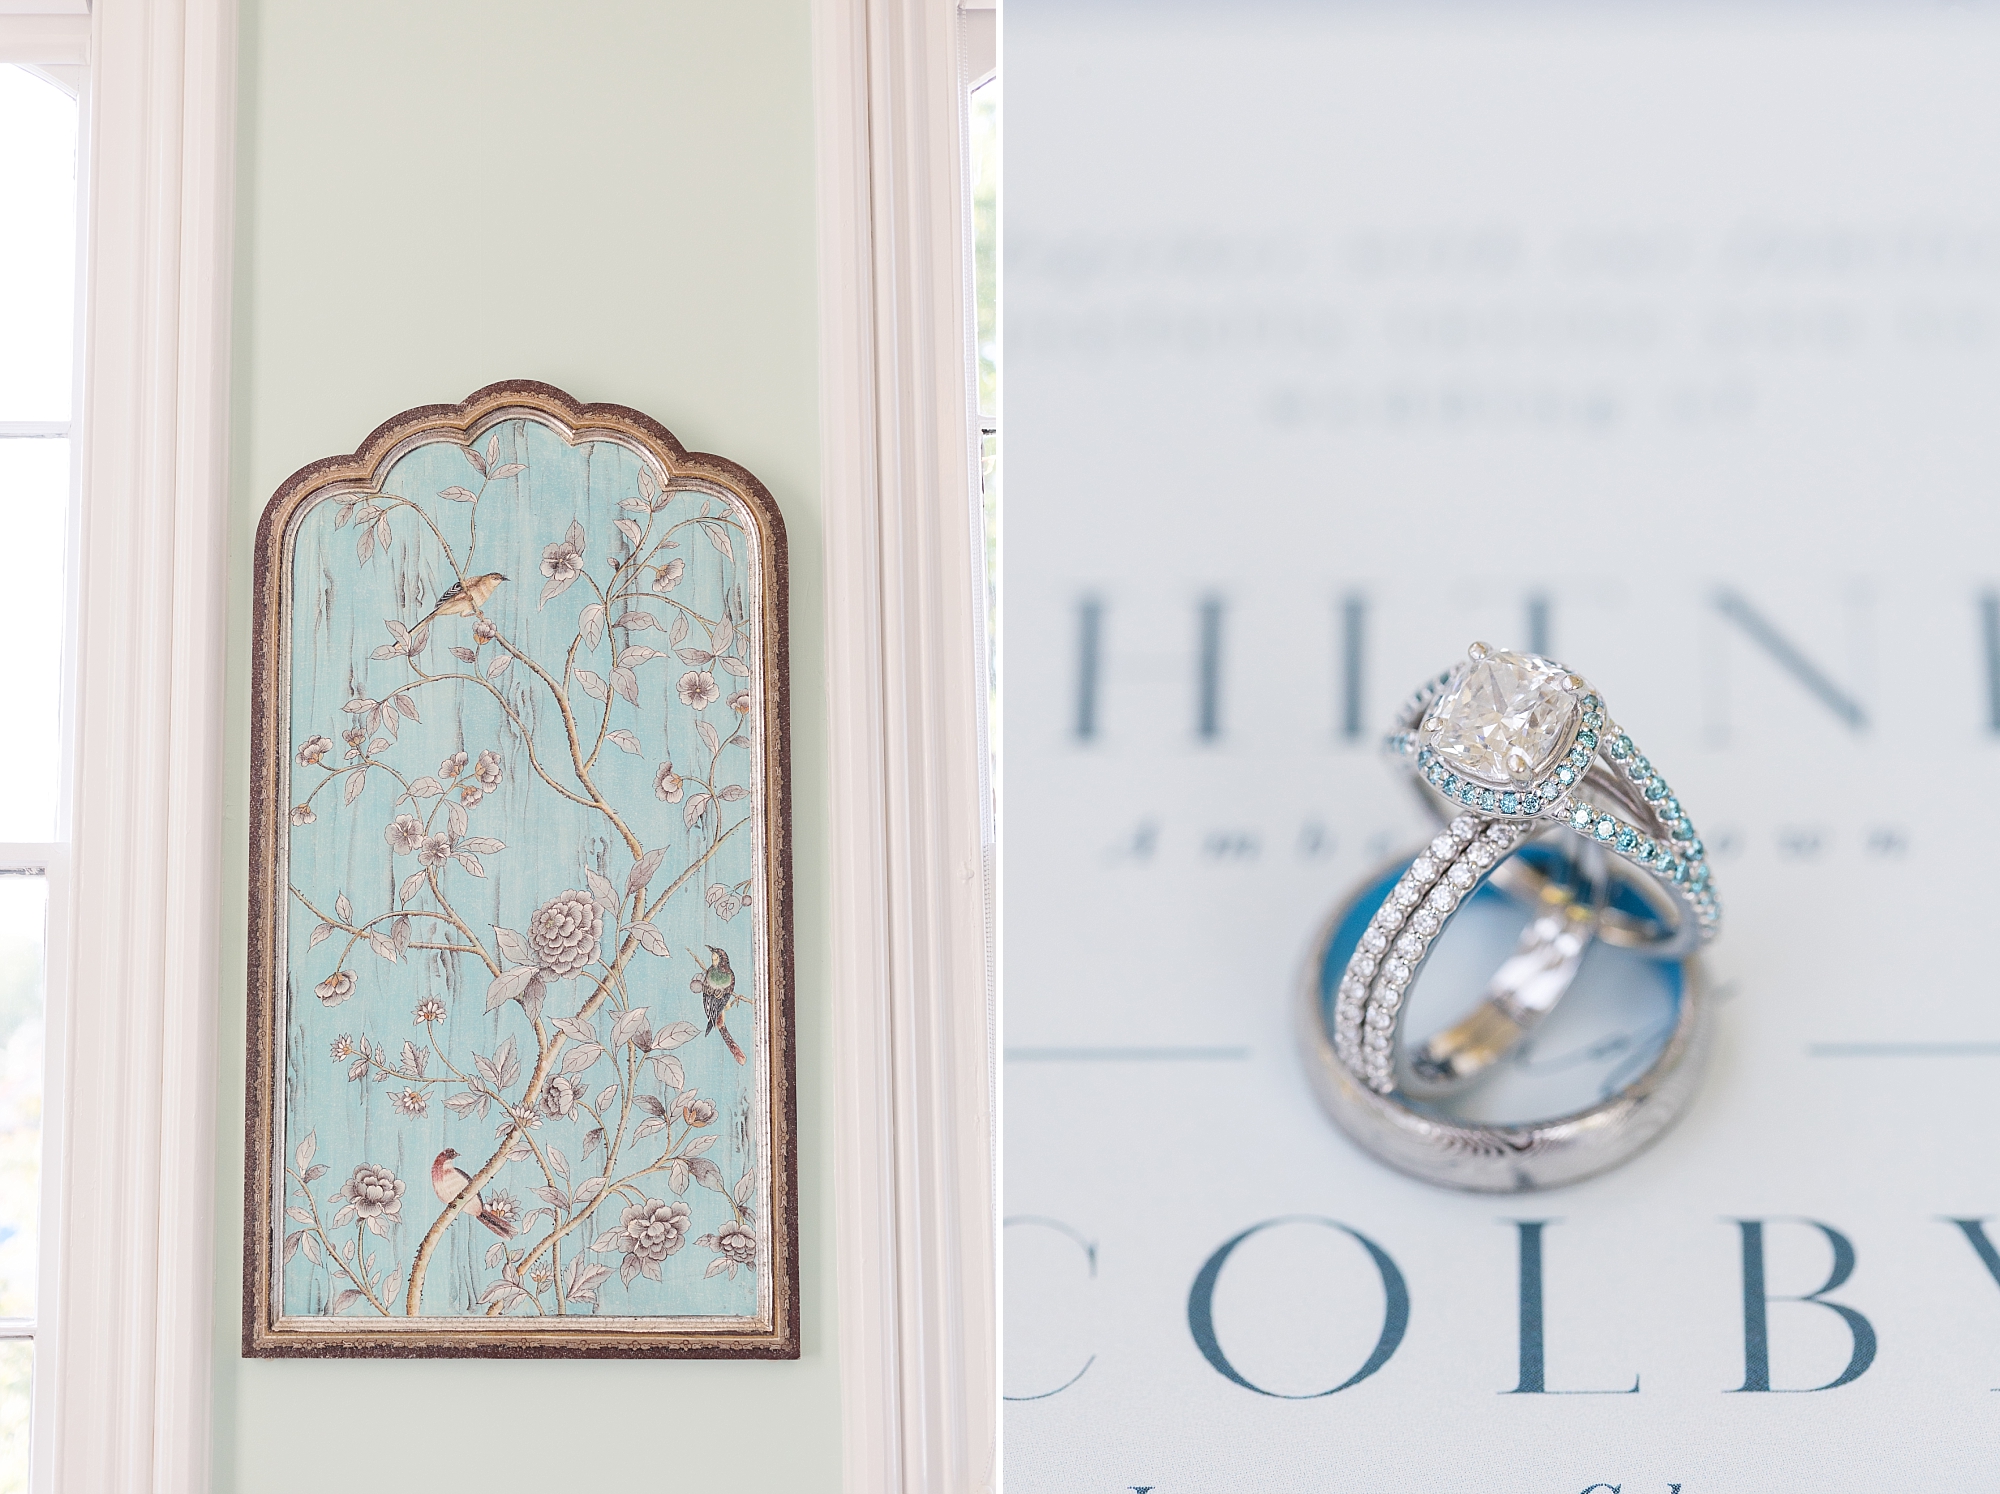 Portrait in wedding venue and detail of wedding rings | Raleigh NC Wedding Photographer